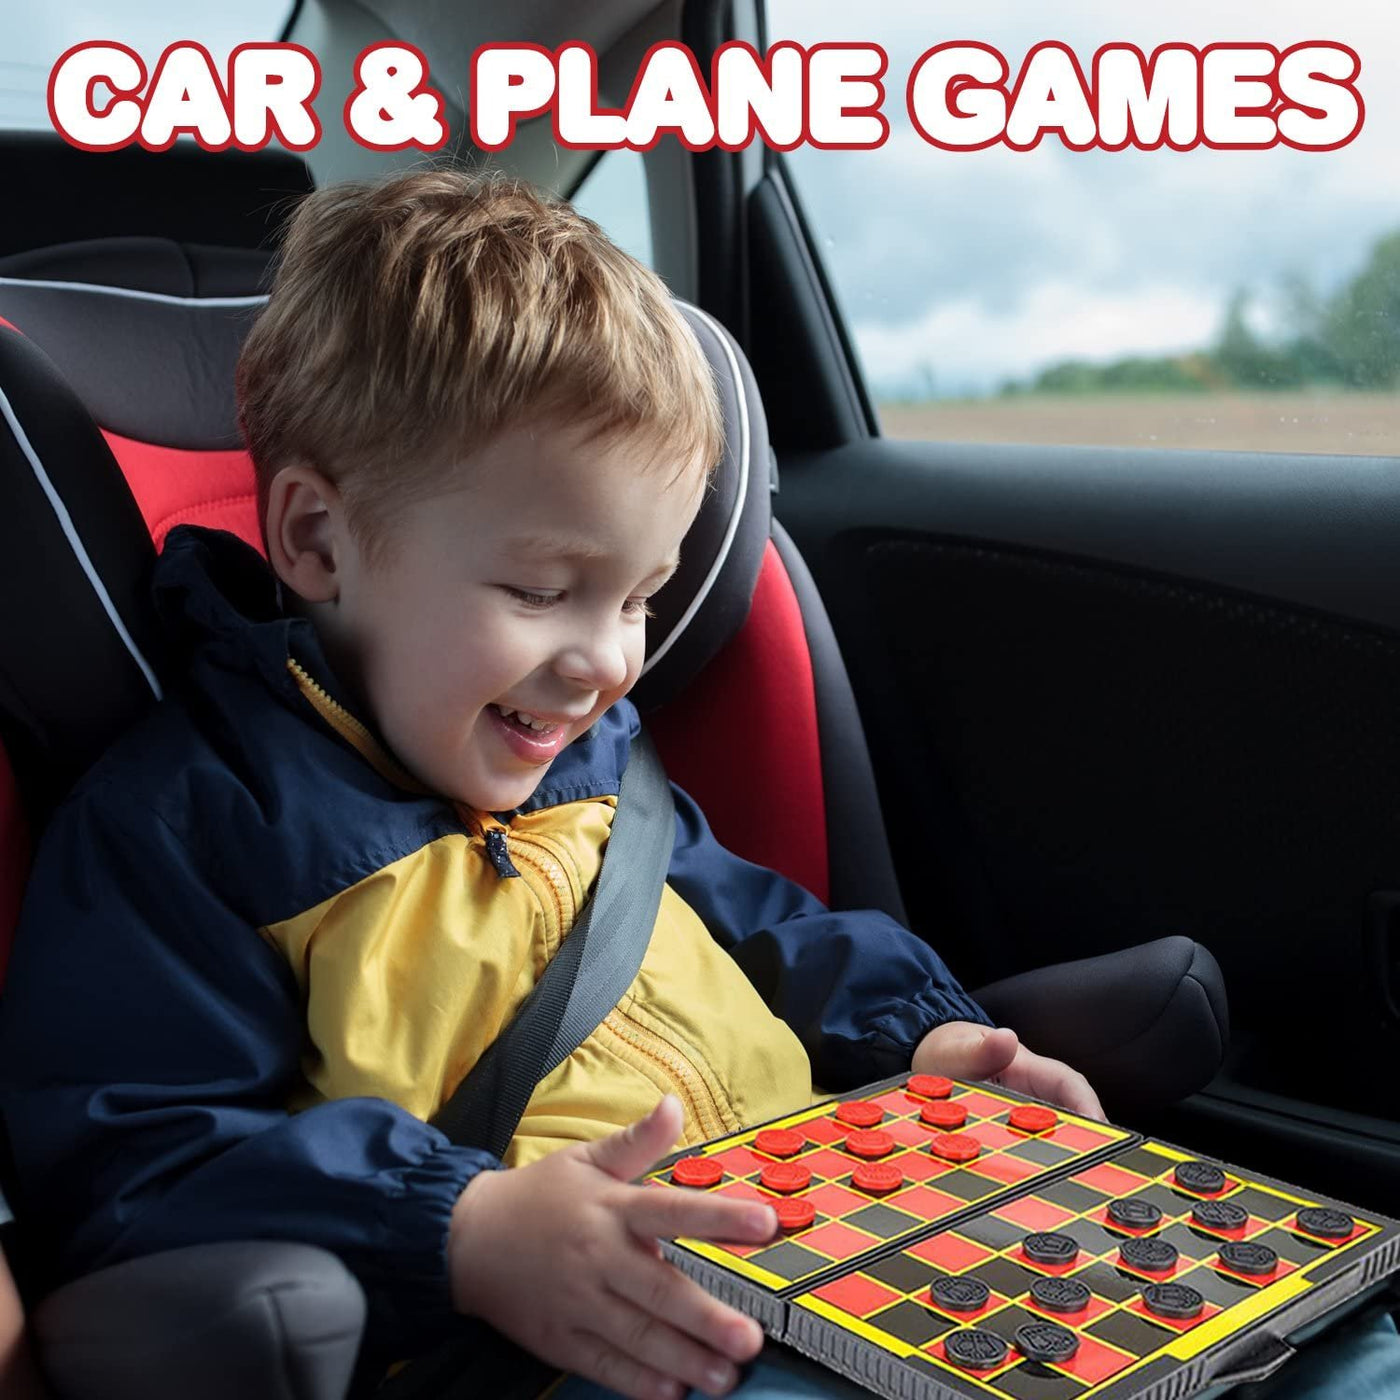 Gamie Travel Road Trip Games for Kids and Adults - 3 Pieces - Set Includes Mini Tic-Tac-Toe, Triangle Game, and Fishing Game - F